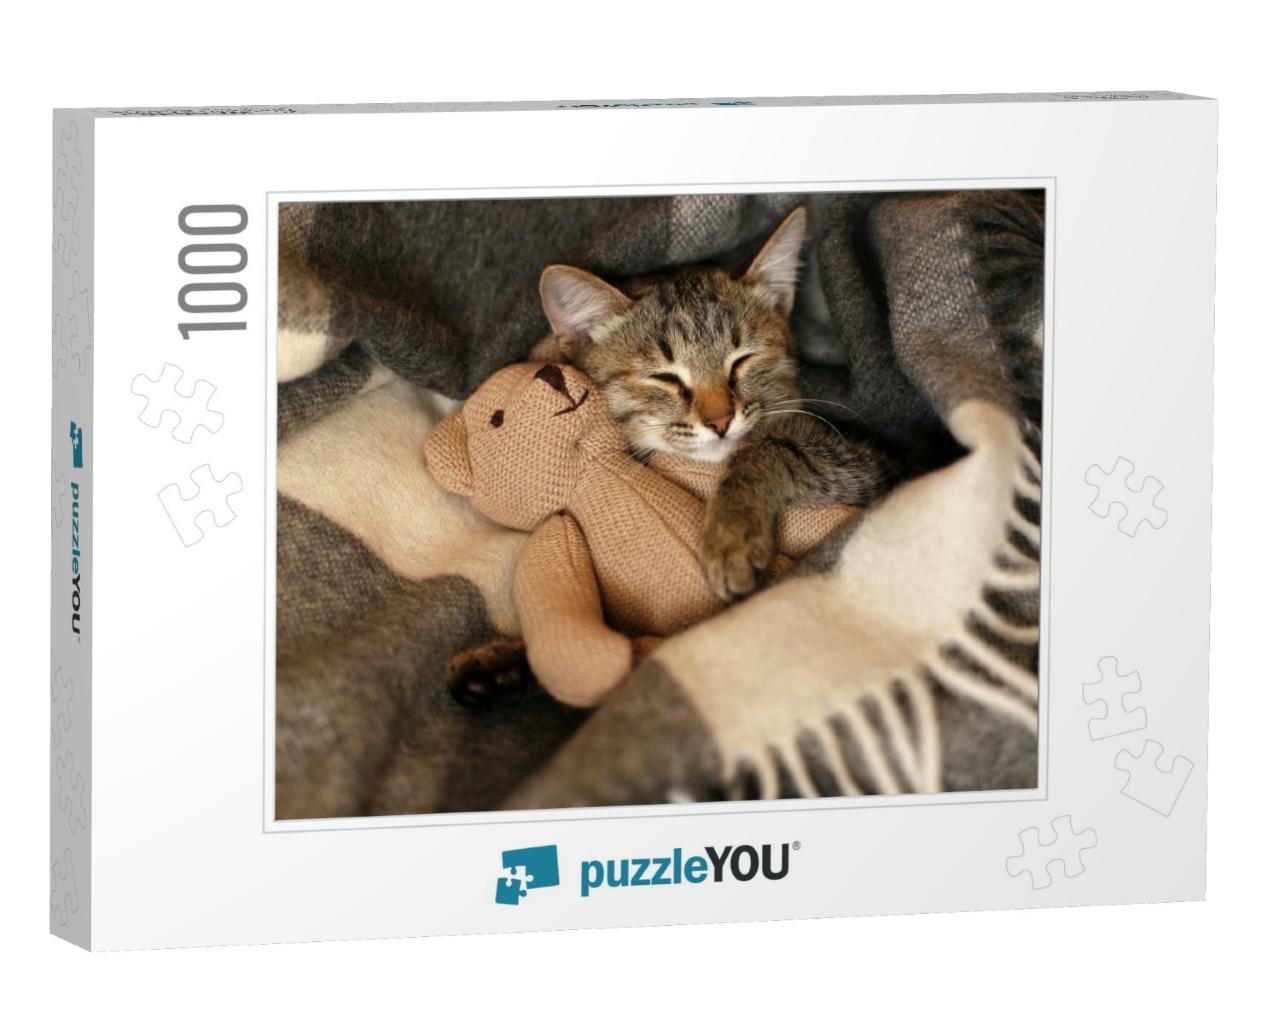 Gray Kitten Sleeping on Gray Plaid Wool Blanket with Tass... Jigsaw Puzzle with 1000 pieces